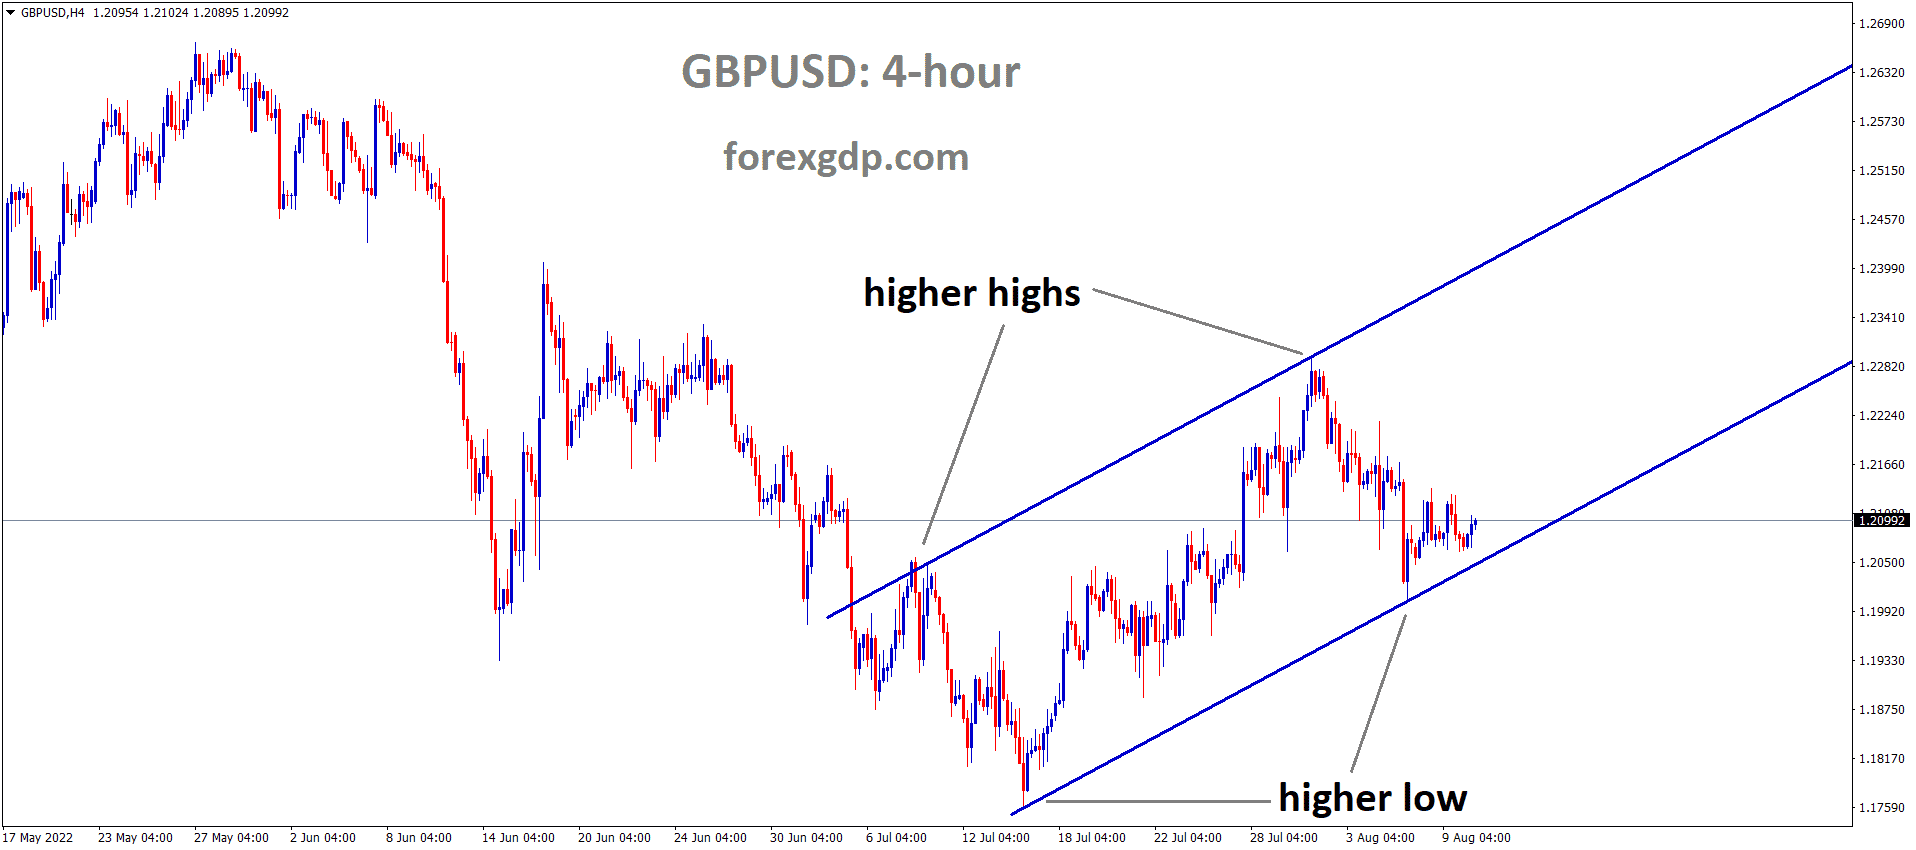 GBPUSD is moving in an Ascending channel and the Market has rebounded from the higher low area of the channel 1